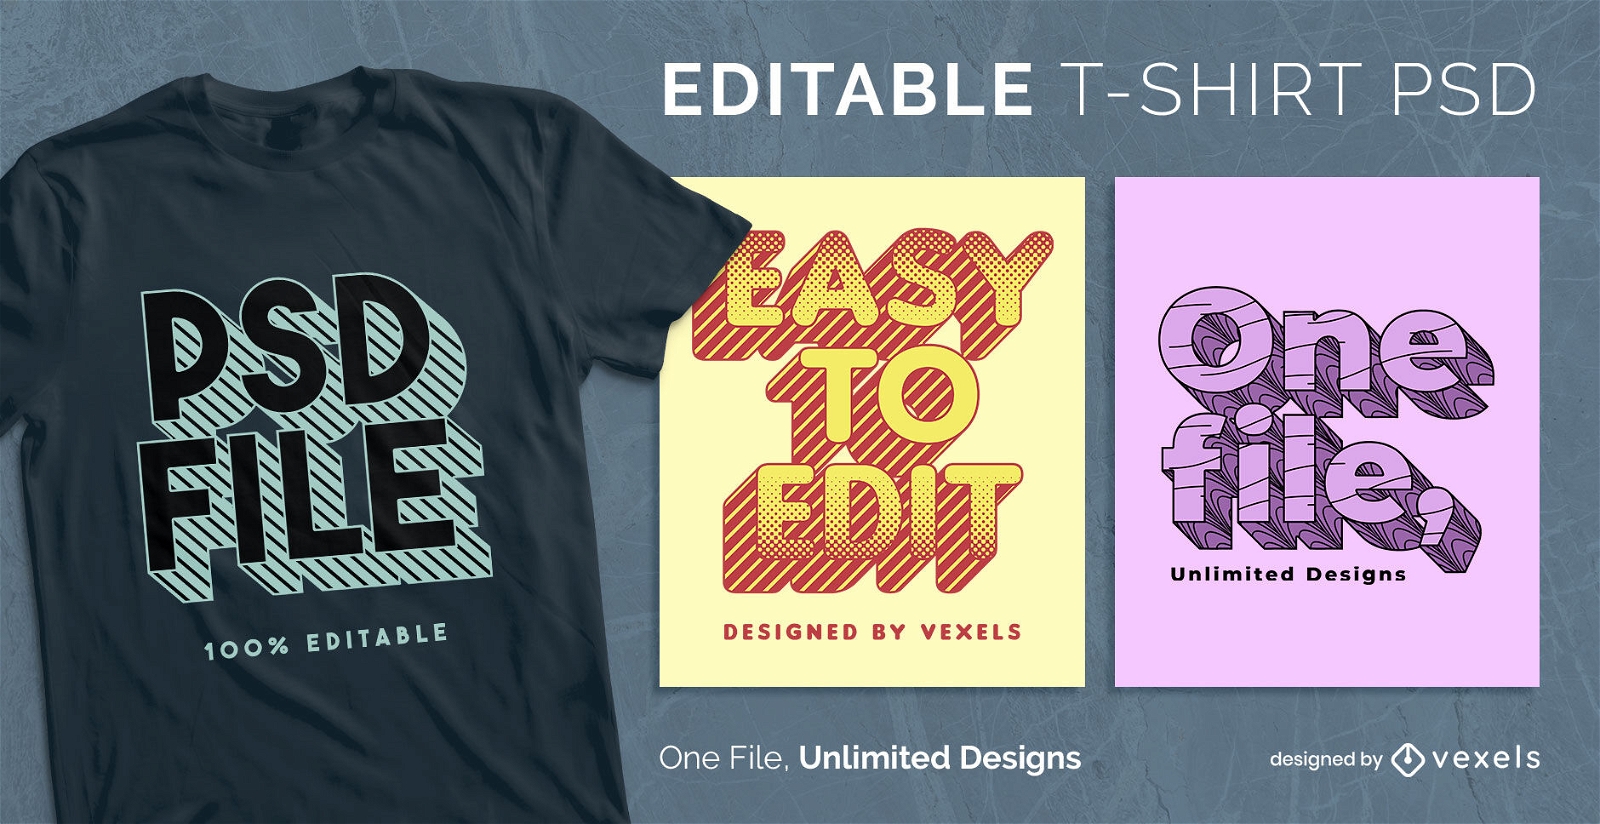 Hand drawn text scalable t-shirt psd